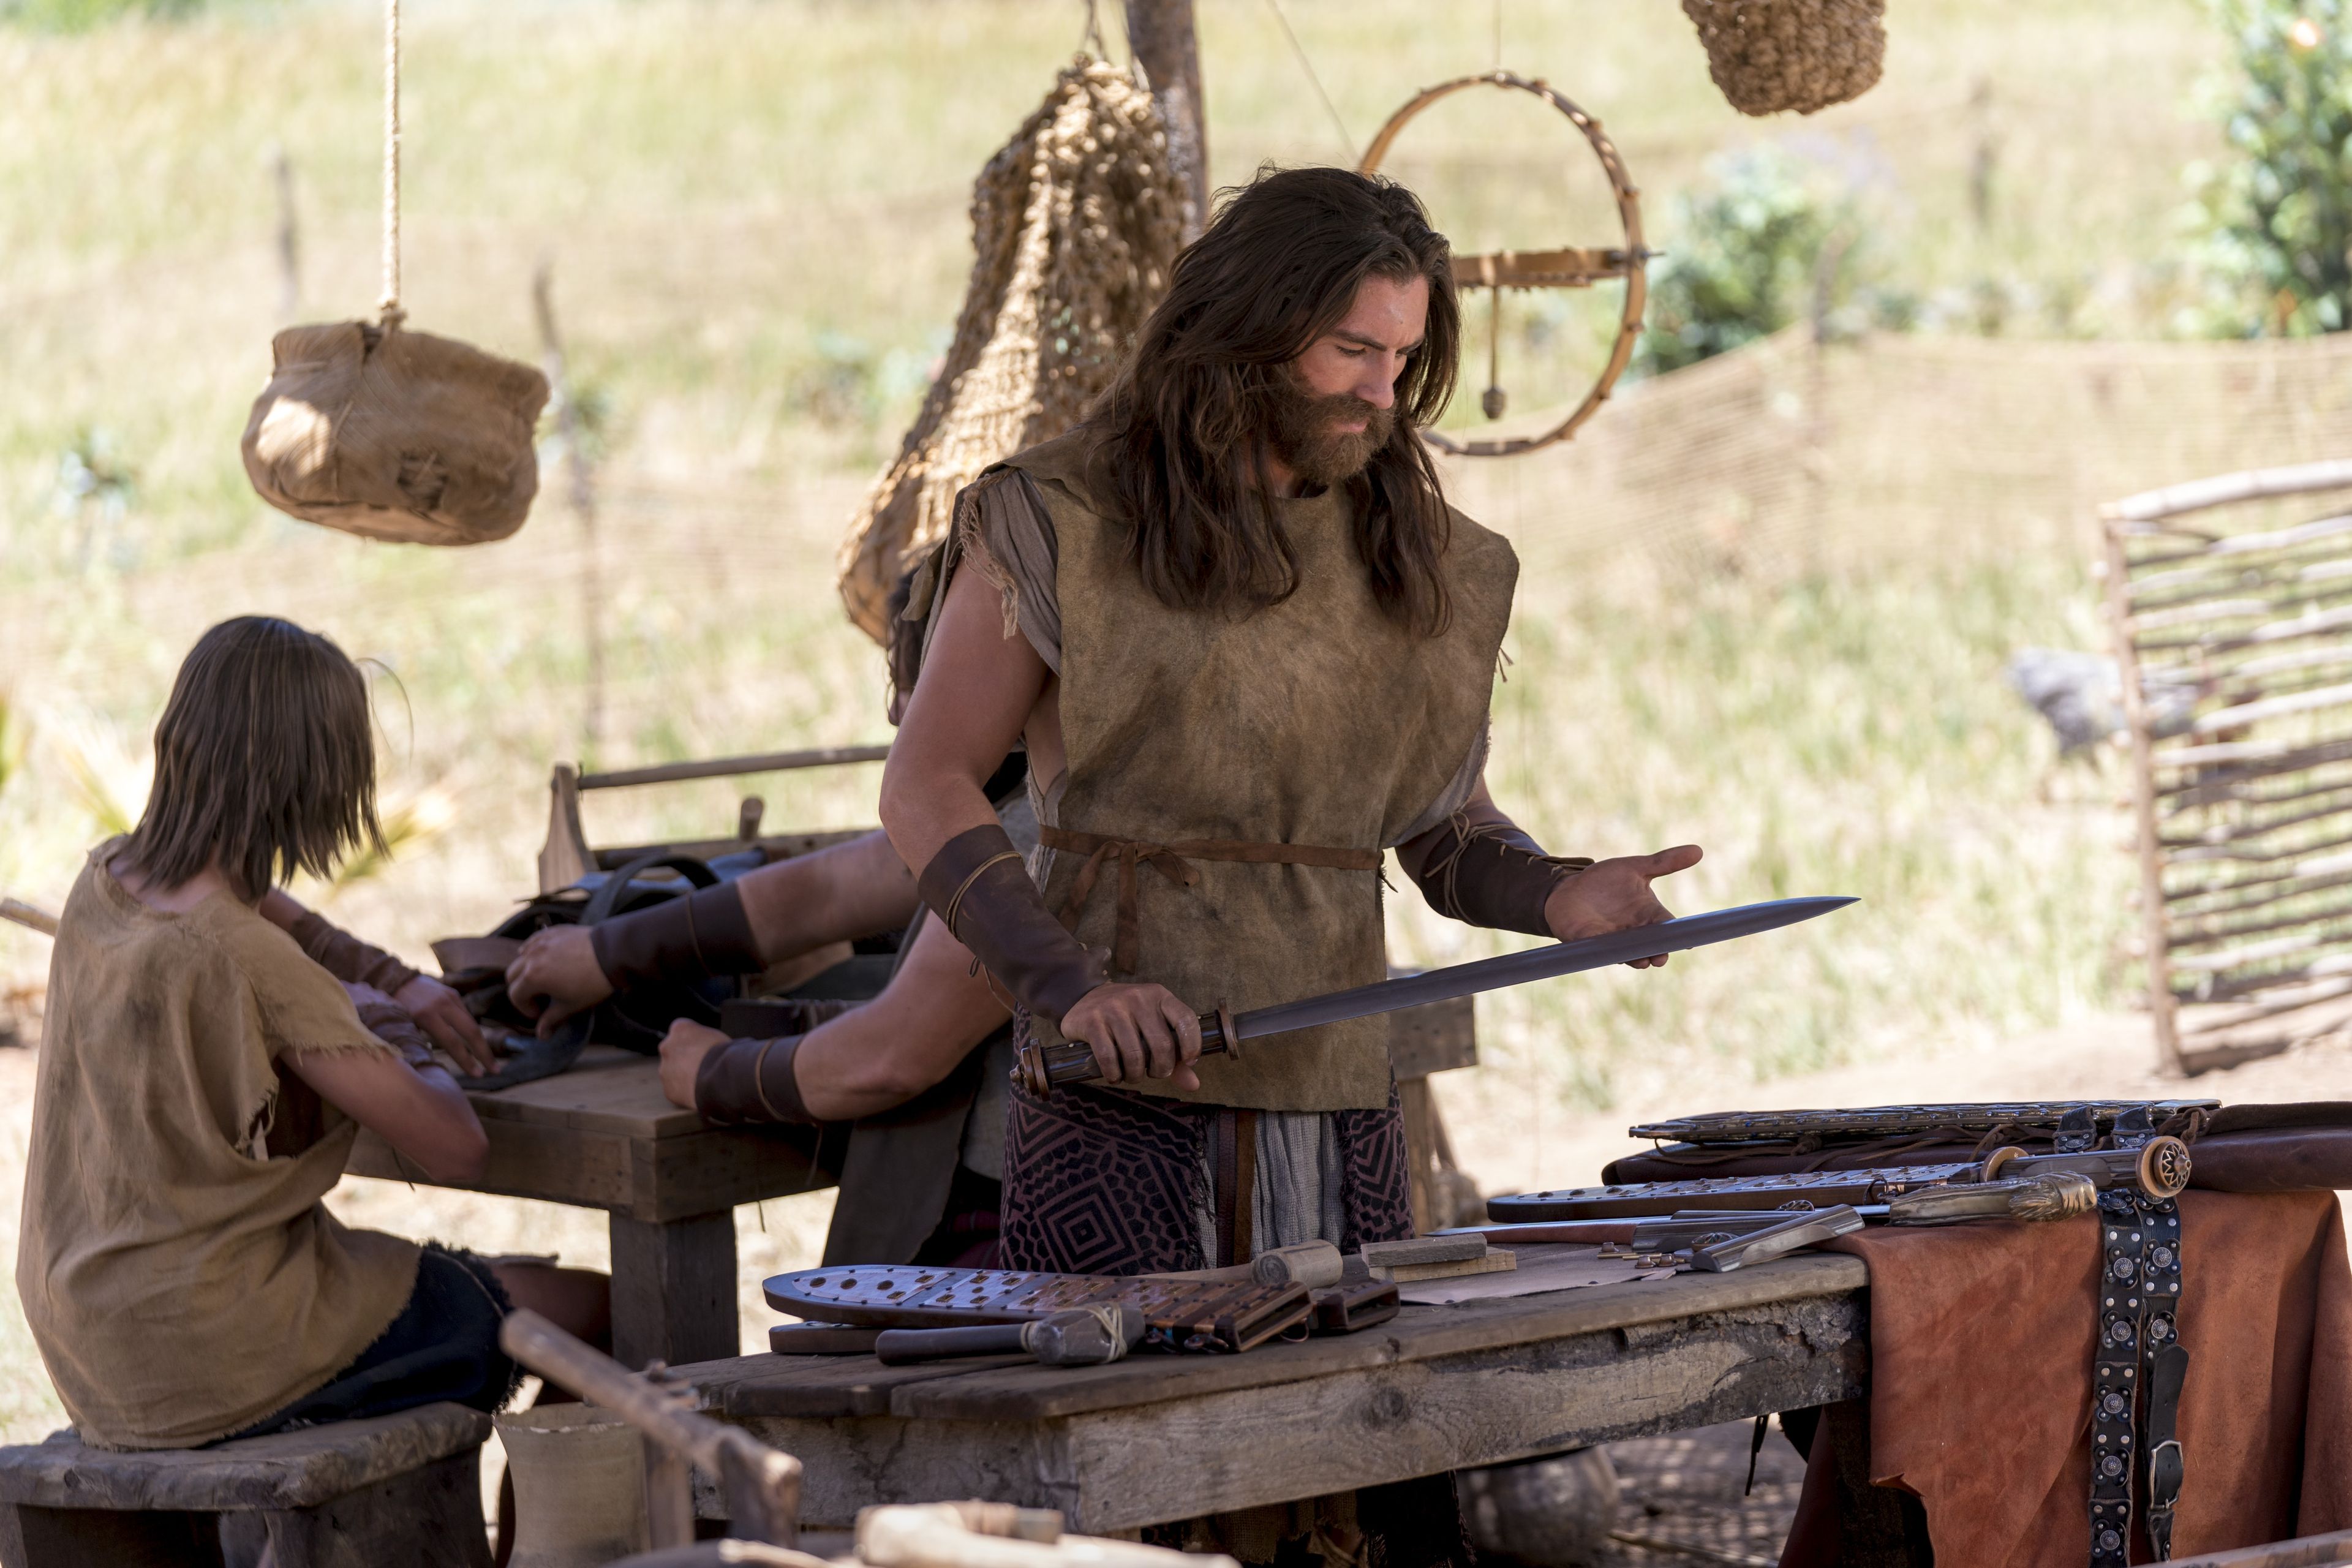 Nephi inspects a sword and other weapons.